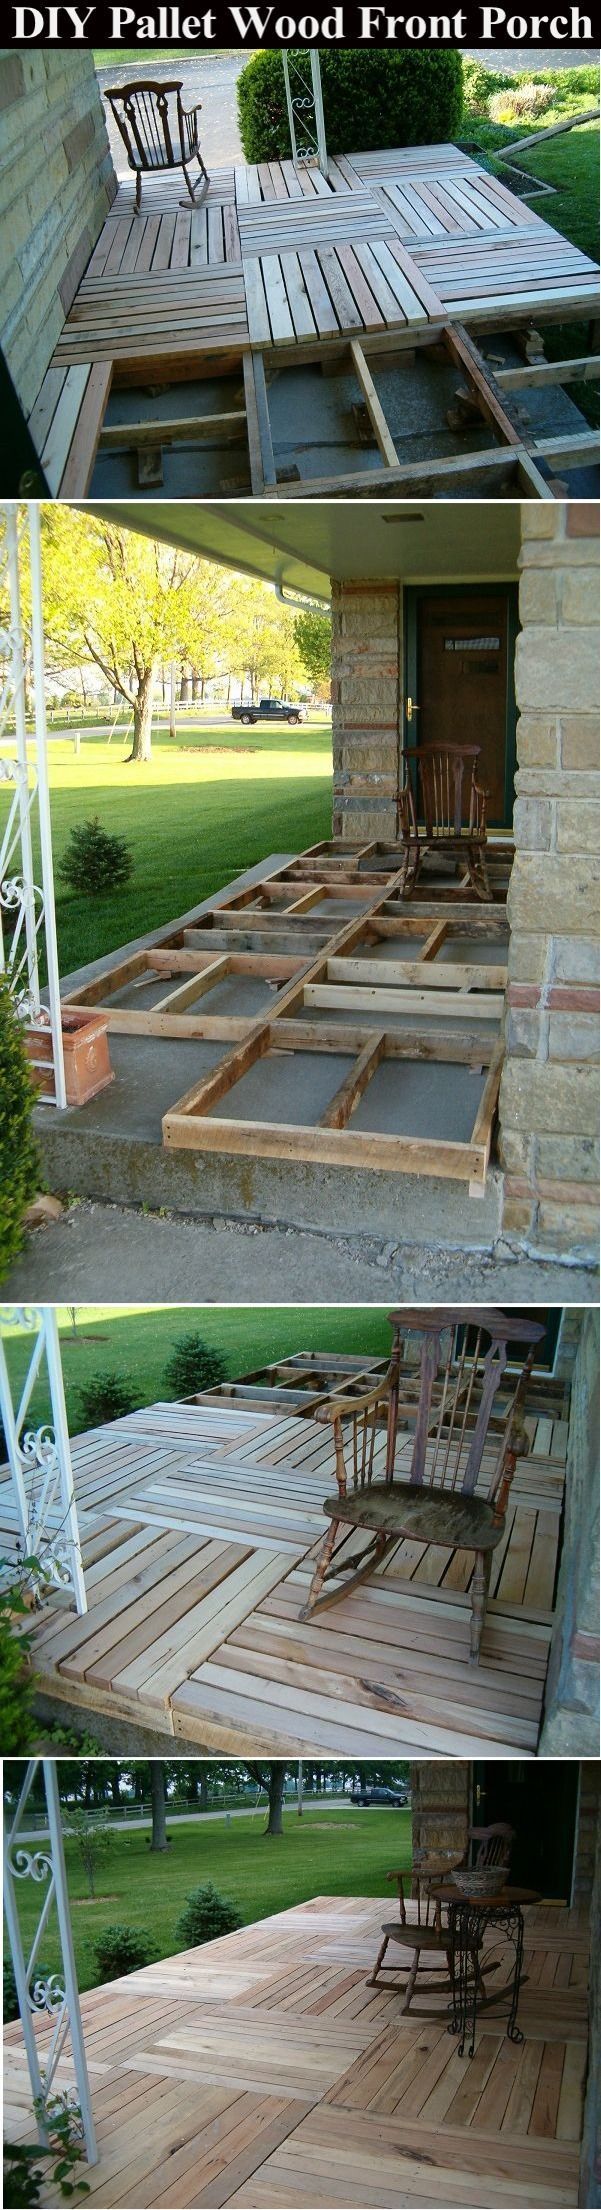 DIY Pallet Wood Front Porch Pictures, Photos, and Images for Facebook, Tumblr, P...